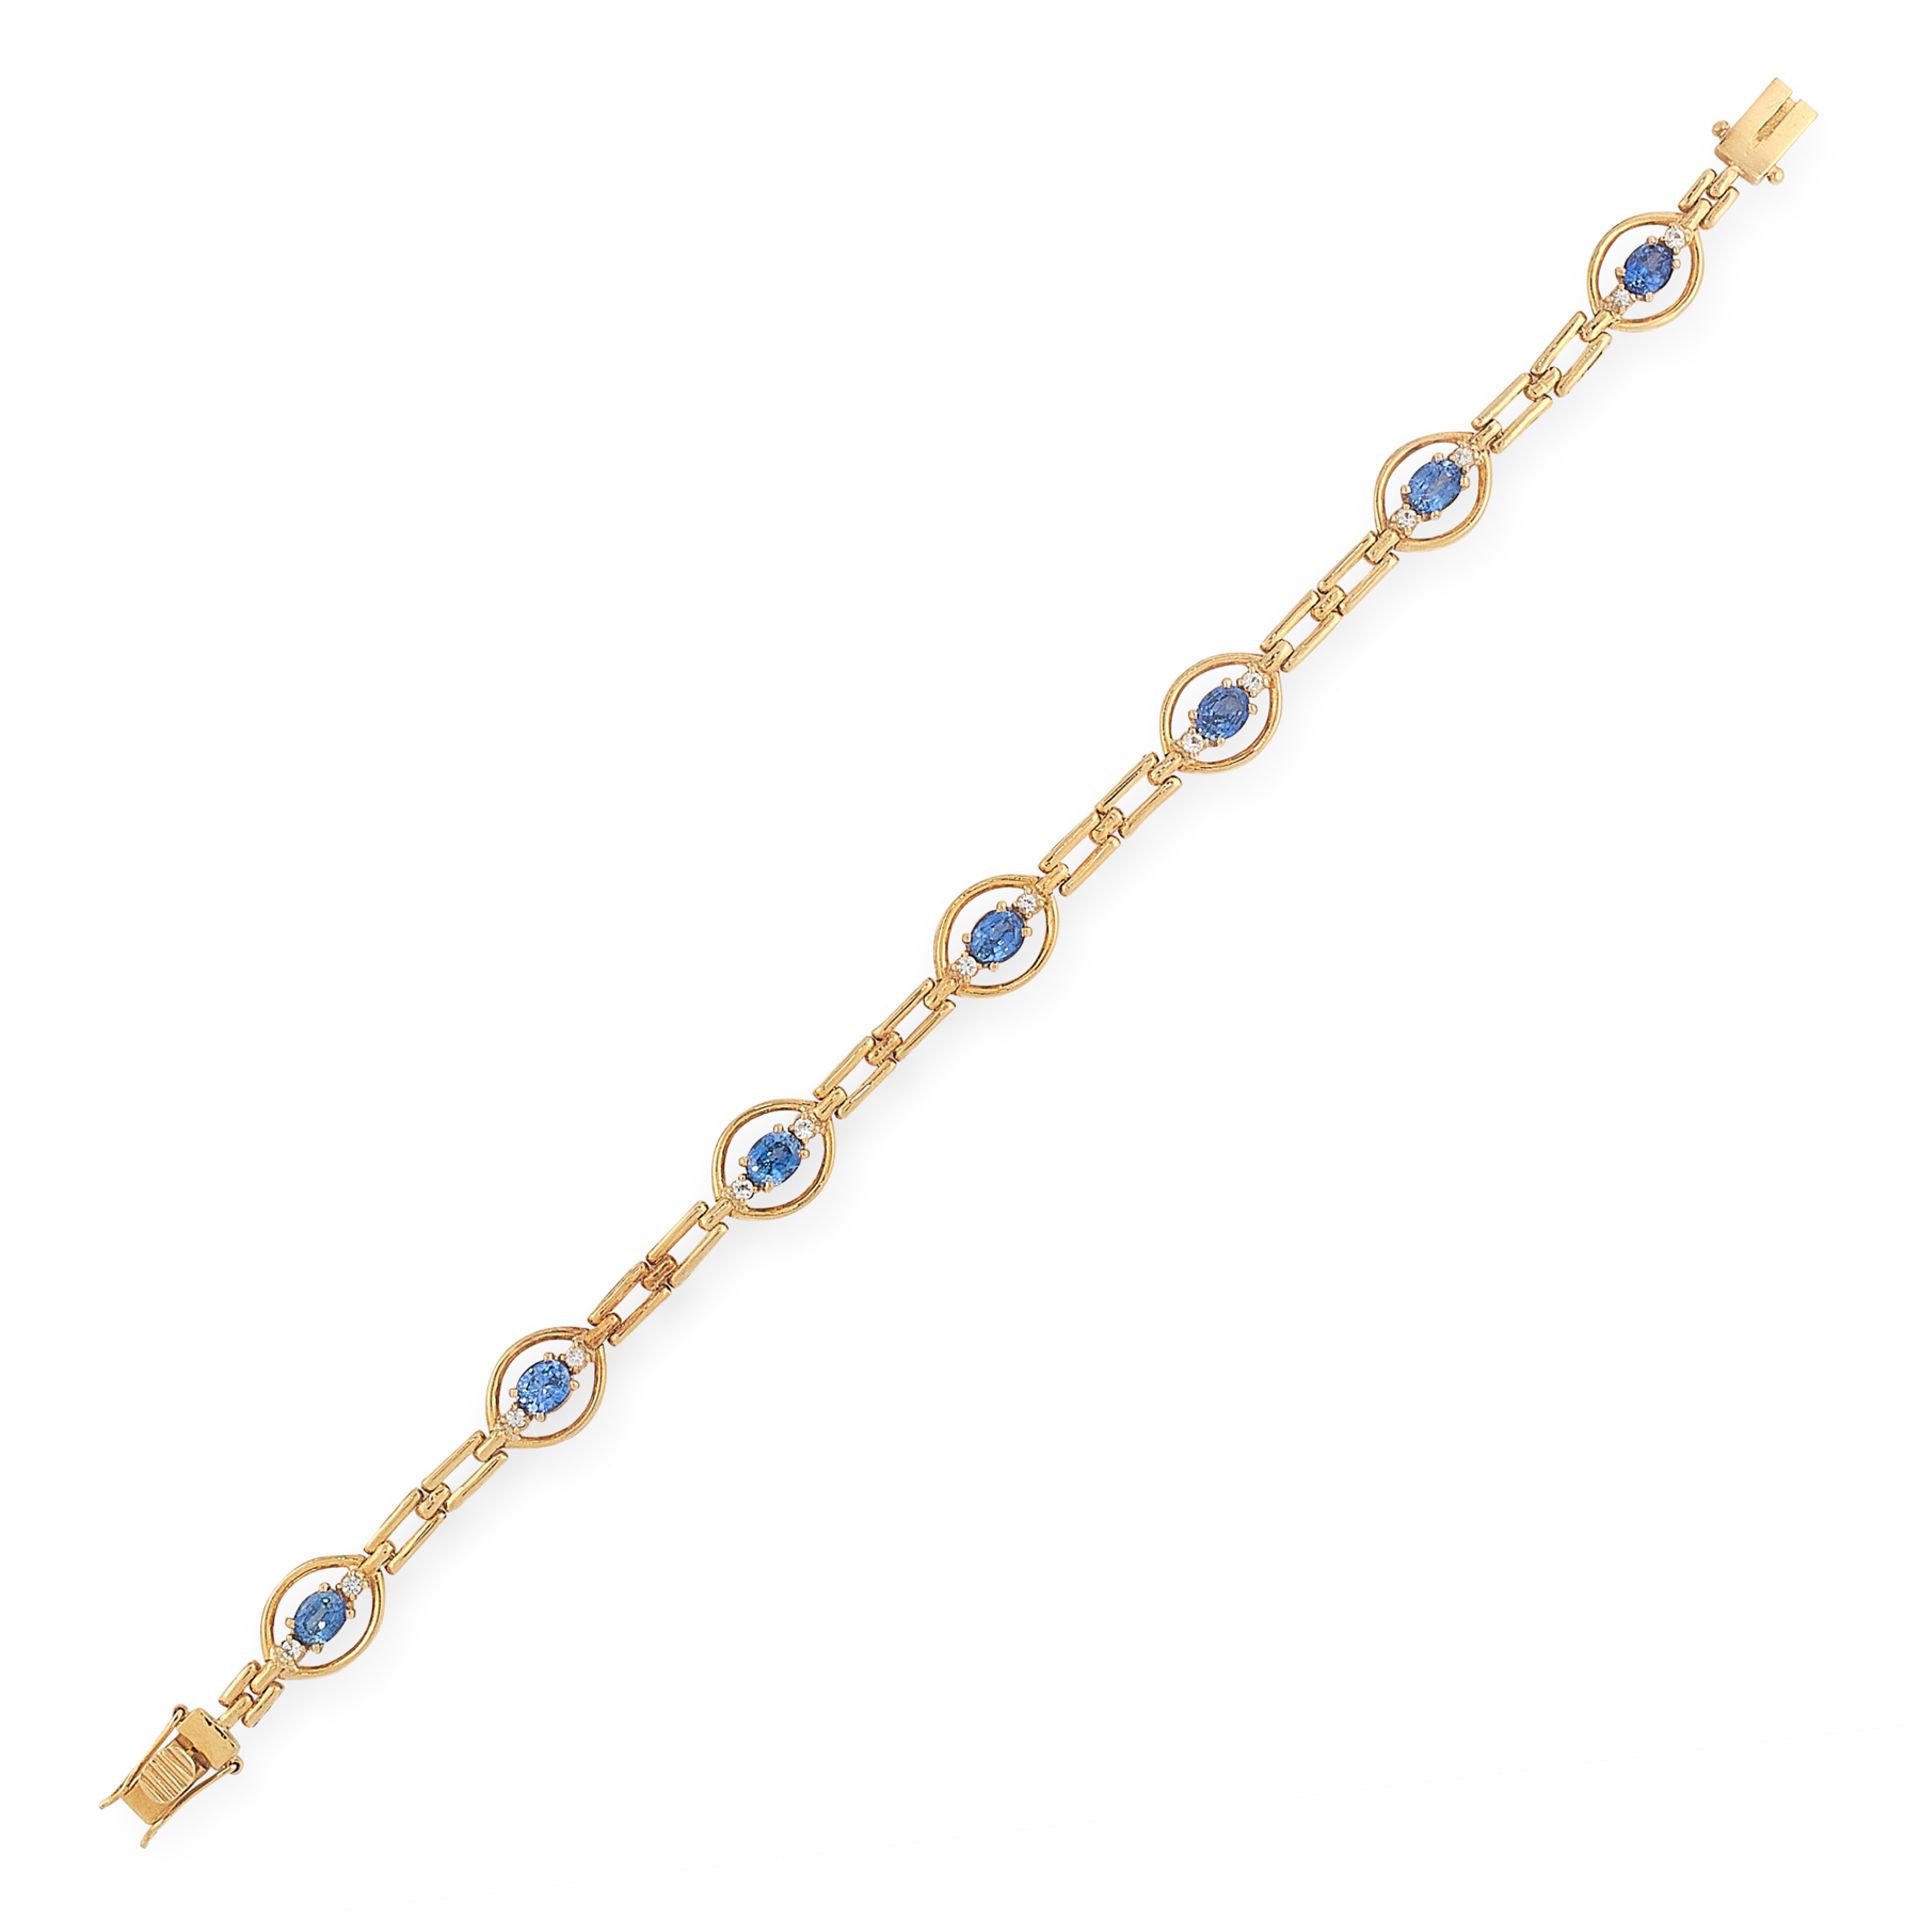 A SAPPHIRE AND DIAMOND BRACELET in 18ct yellow gold, the fancy link chain is set with oval cut